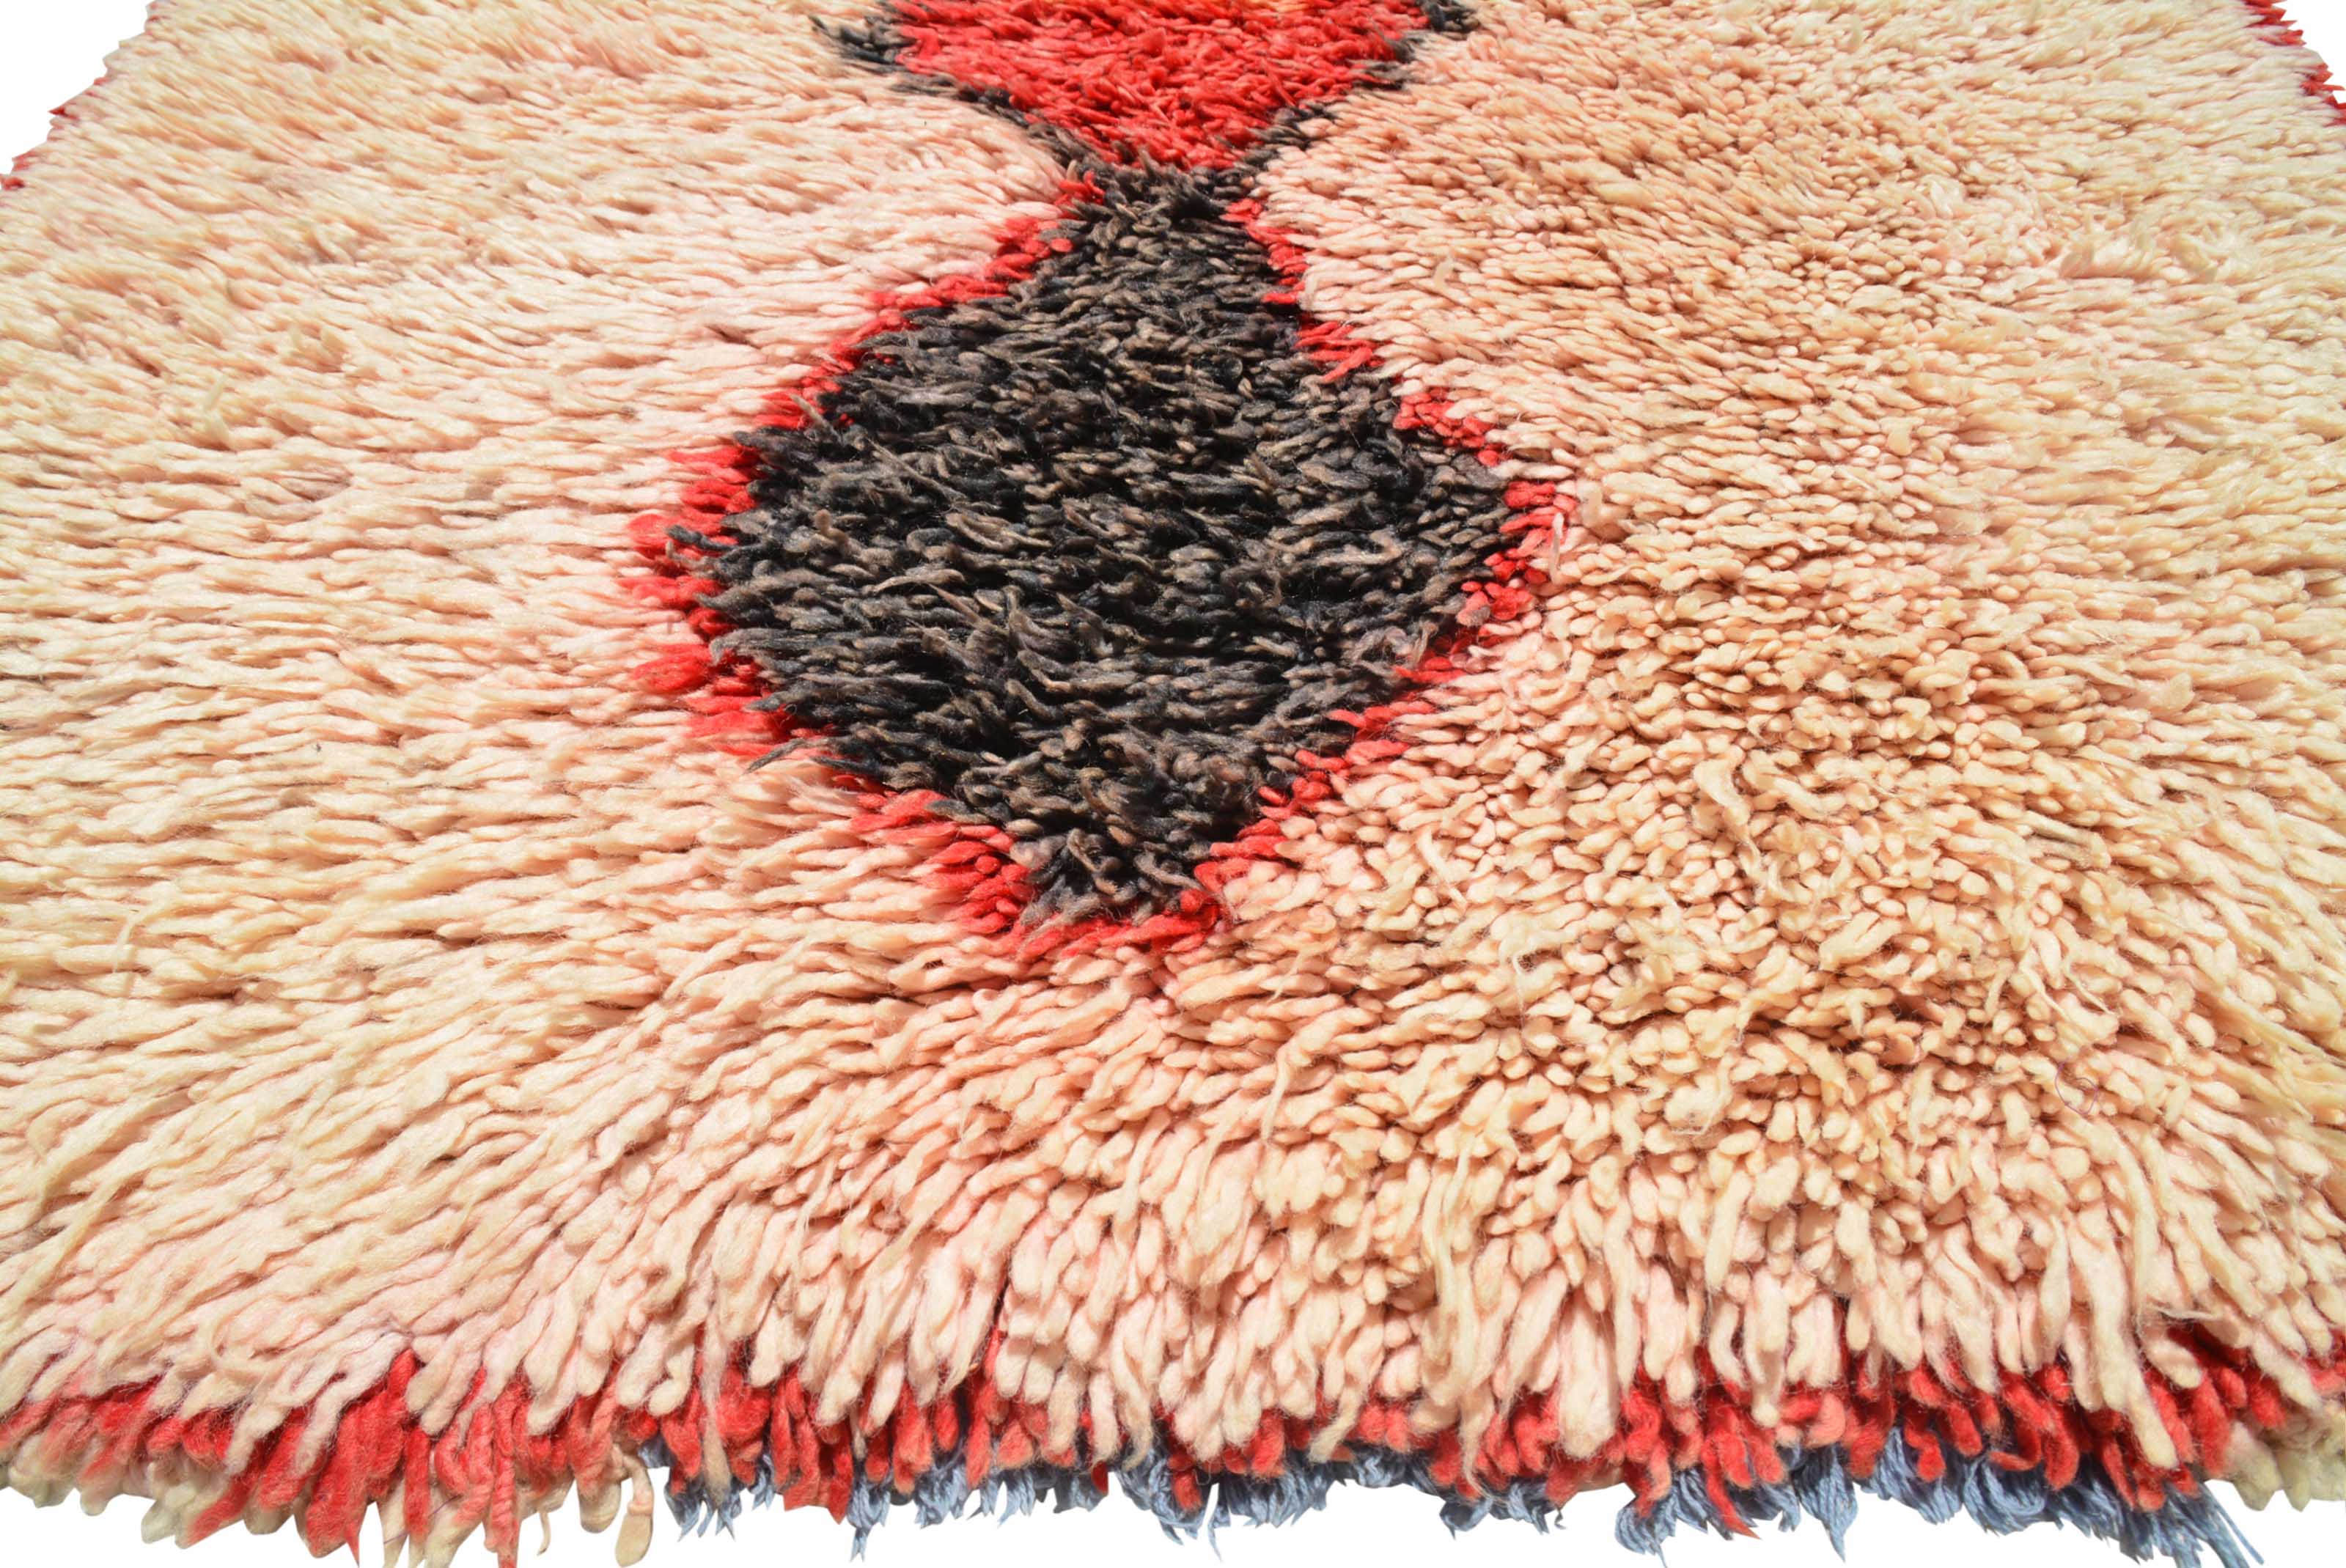 Vintage Moroccan Rug Red And Black Rugs | Vintage Moroccan Rug   illuminate collective 